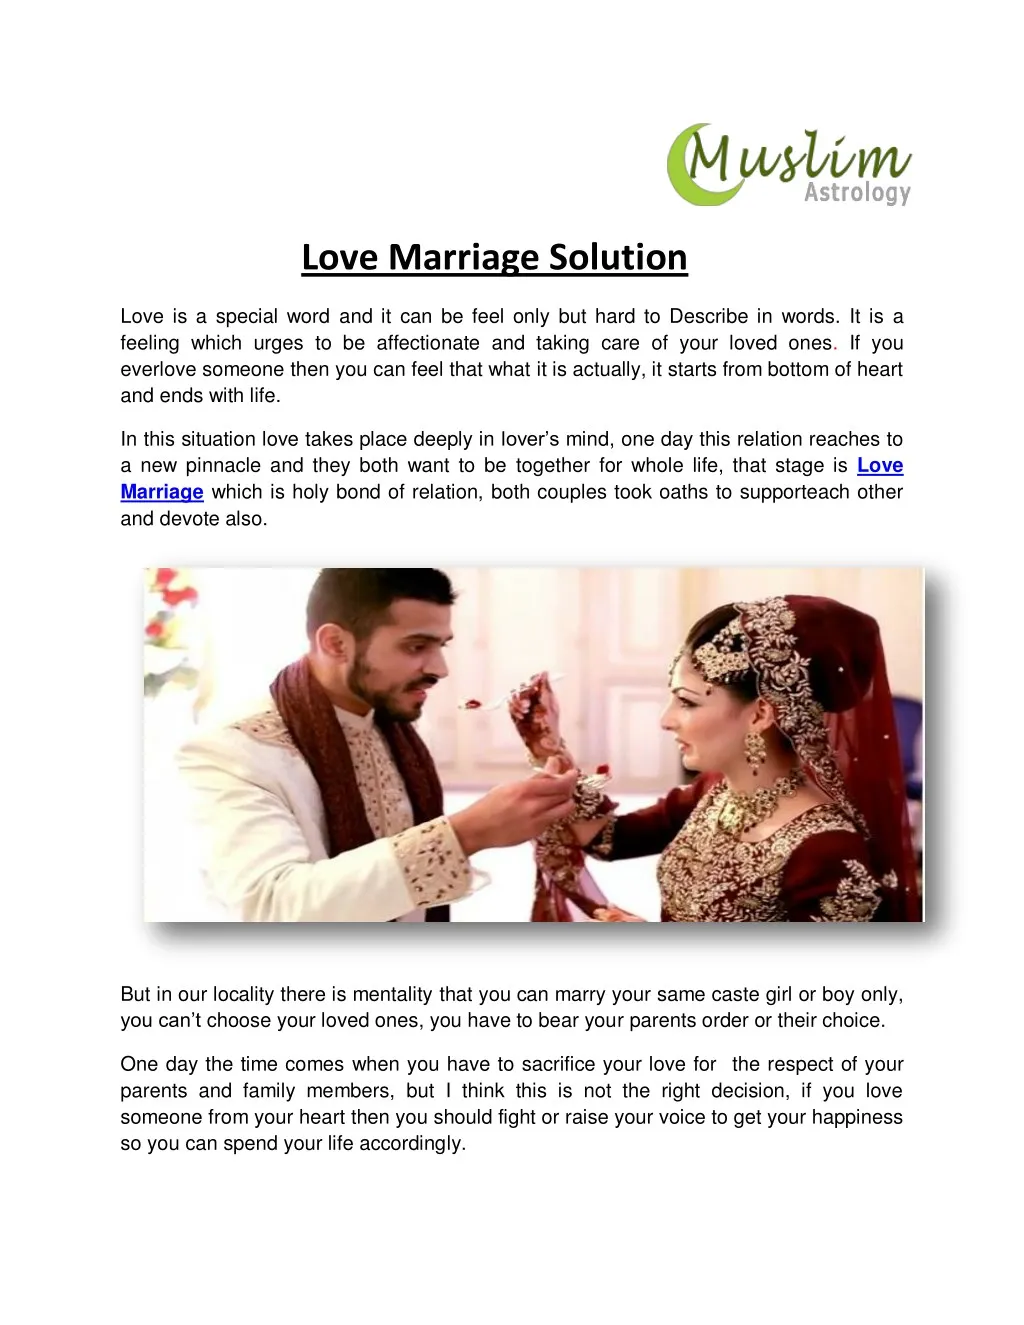 love marriage solution